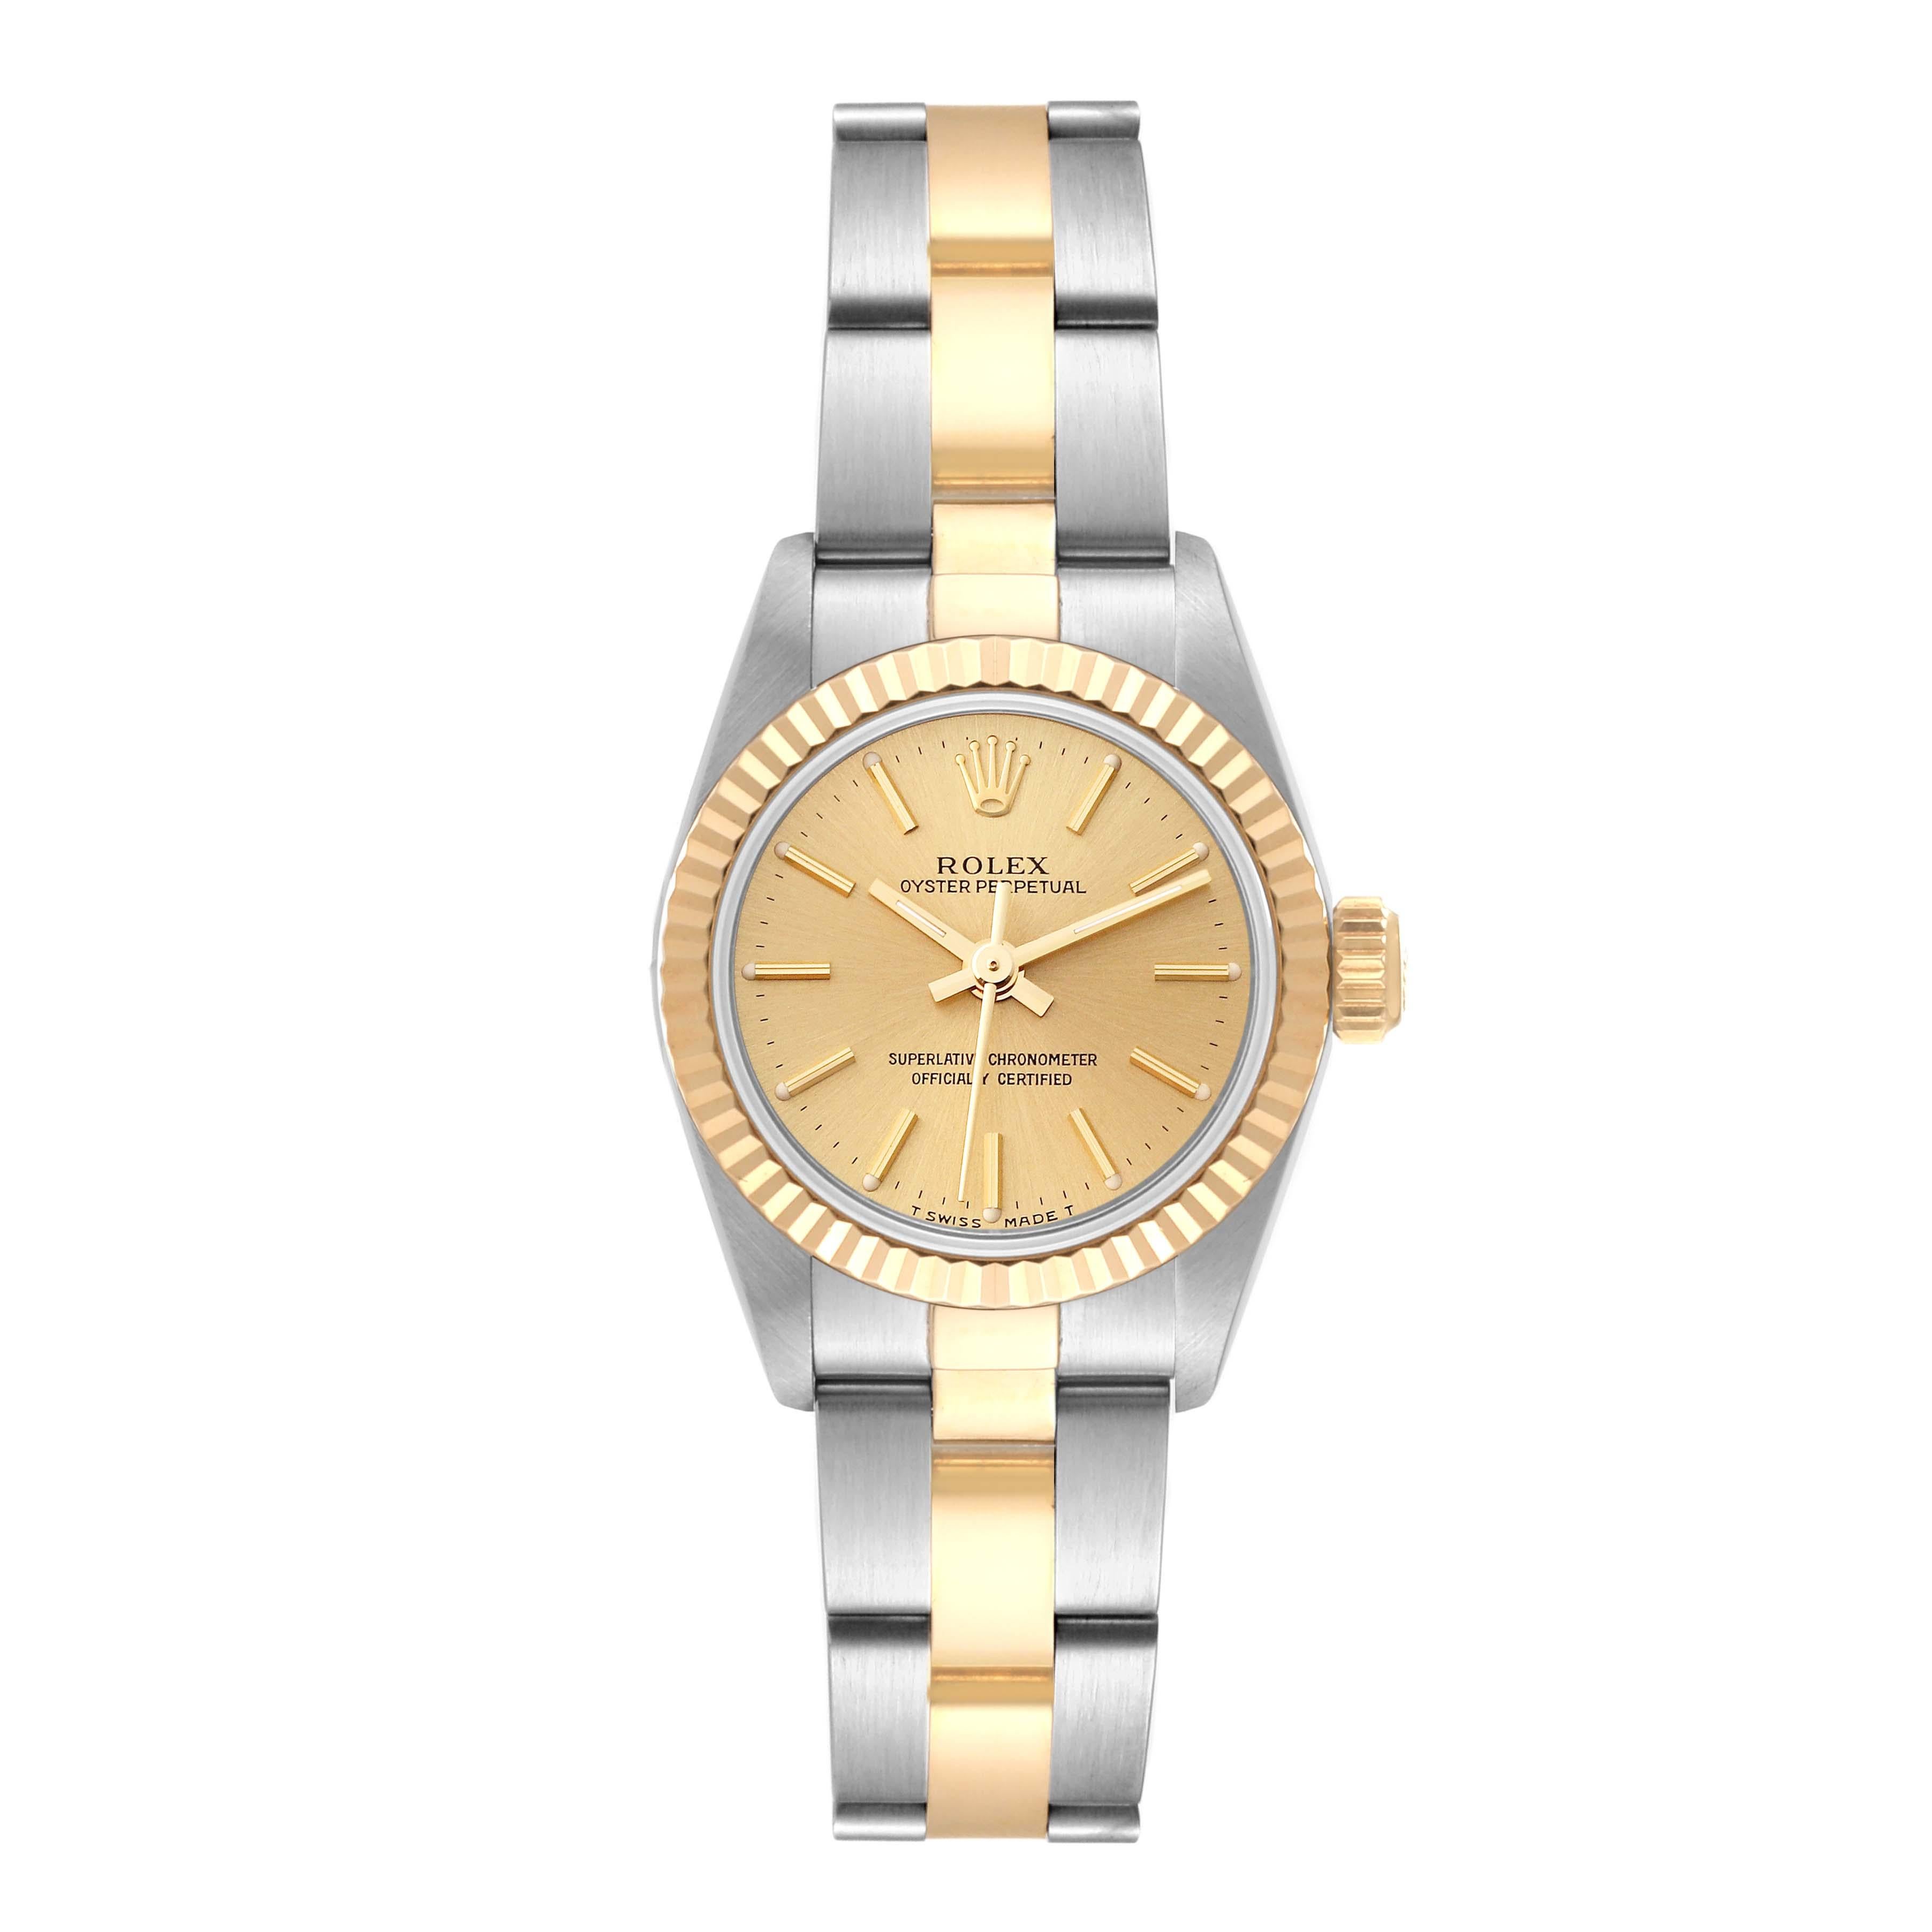 Rolex Oyster Perpetual Steel Yellow Gold Ladies Watch 67193. Officially certified chronometer automatic self-winding movement. Stainless steel oyster case 24.0 mm in diameter. Rolex logo on an 18k yellow gold crown. 18k yellow gold fluted bezel.